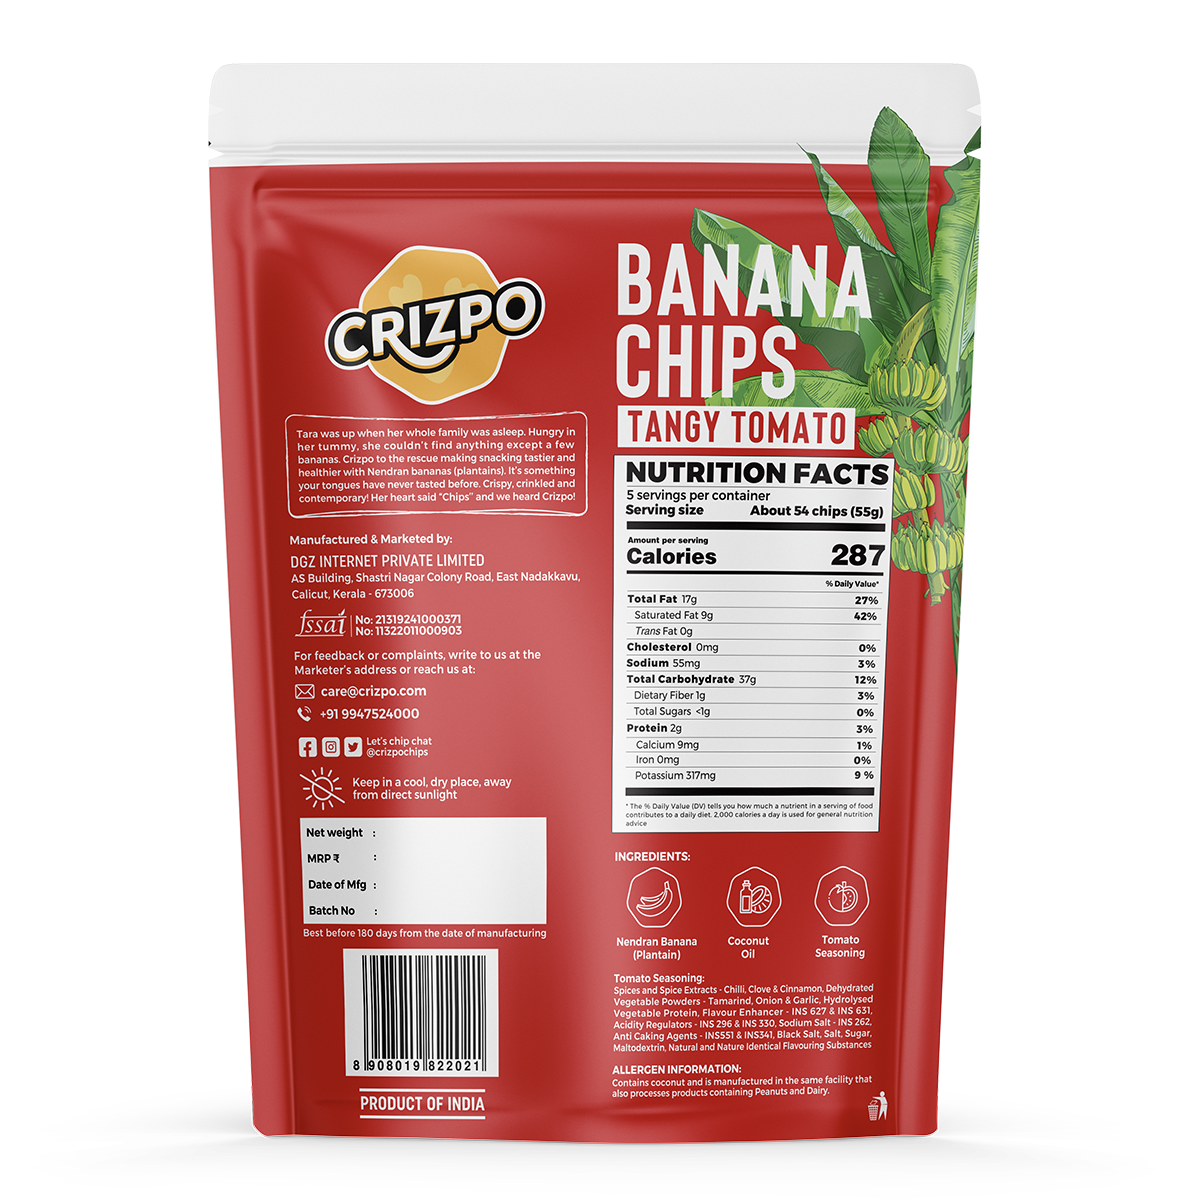 Crizpo Banana Chips - Tangy Tomato - Pack of 2 x 110g